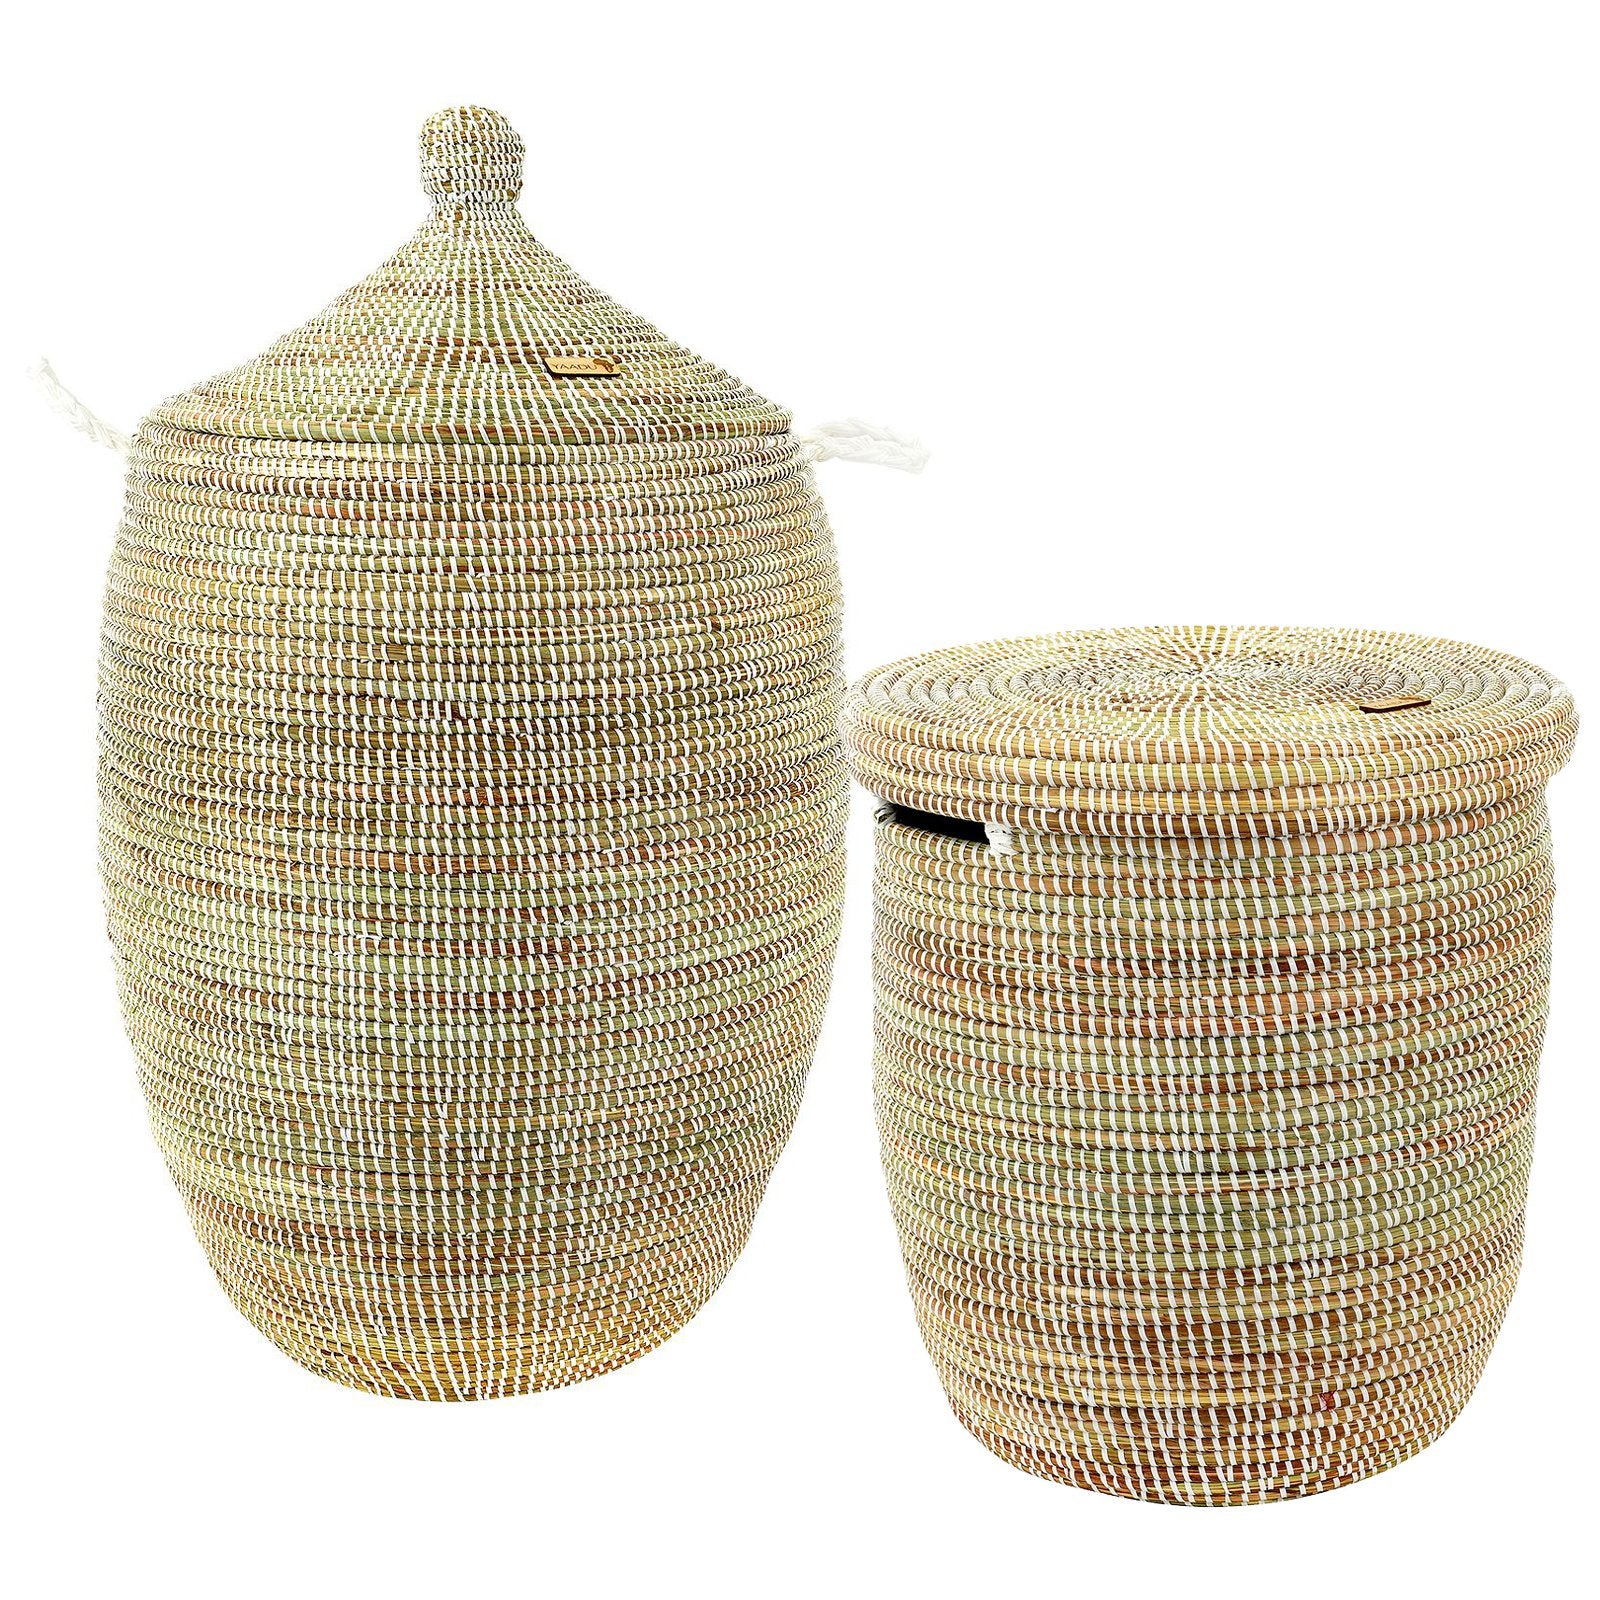 African laundry baskets with lids – white / natural